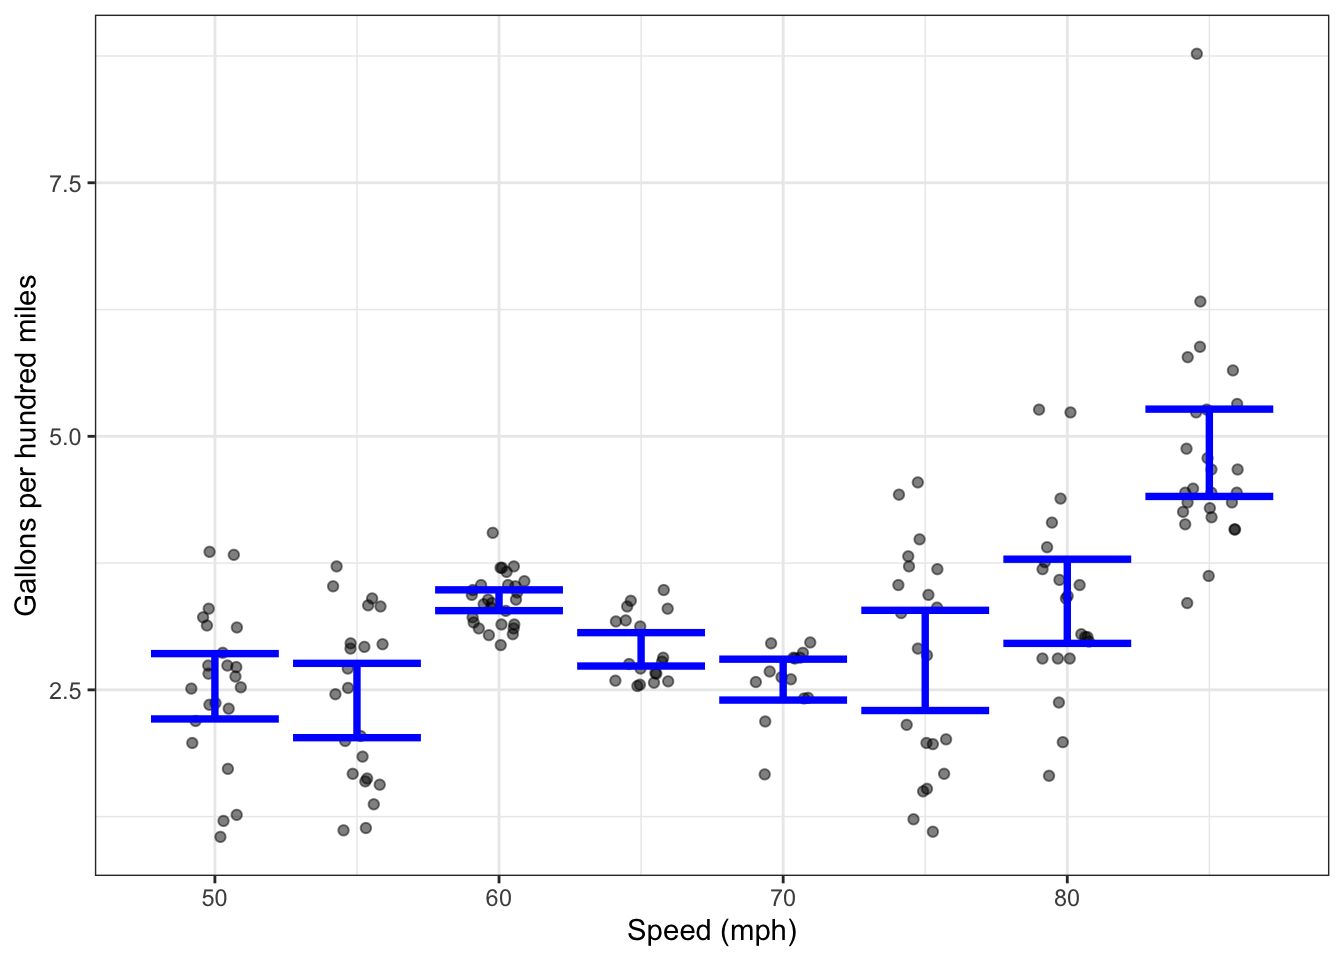 The relationship between fuel consumption and speed that we’ll use in the broader model. This model indicates that speed near 55 mph results in the lowest fuel consumption (of 2.5 gallons per mile), but this is almost matched at speeds of 65 to 75 mph.